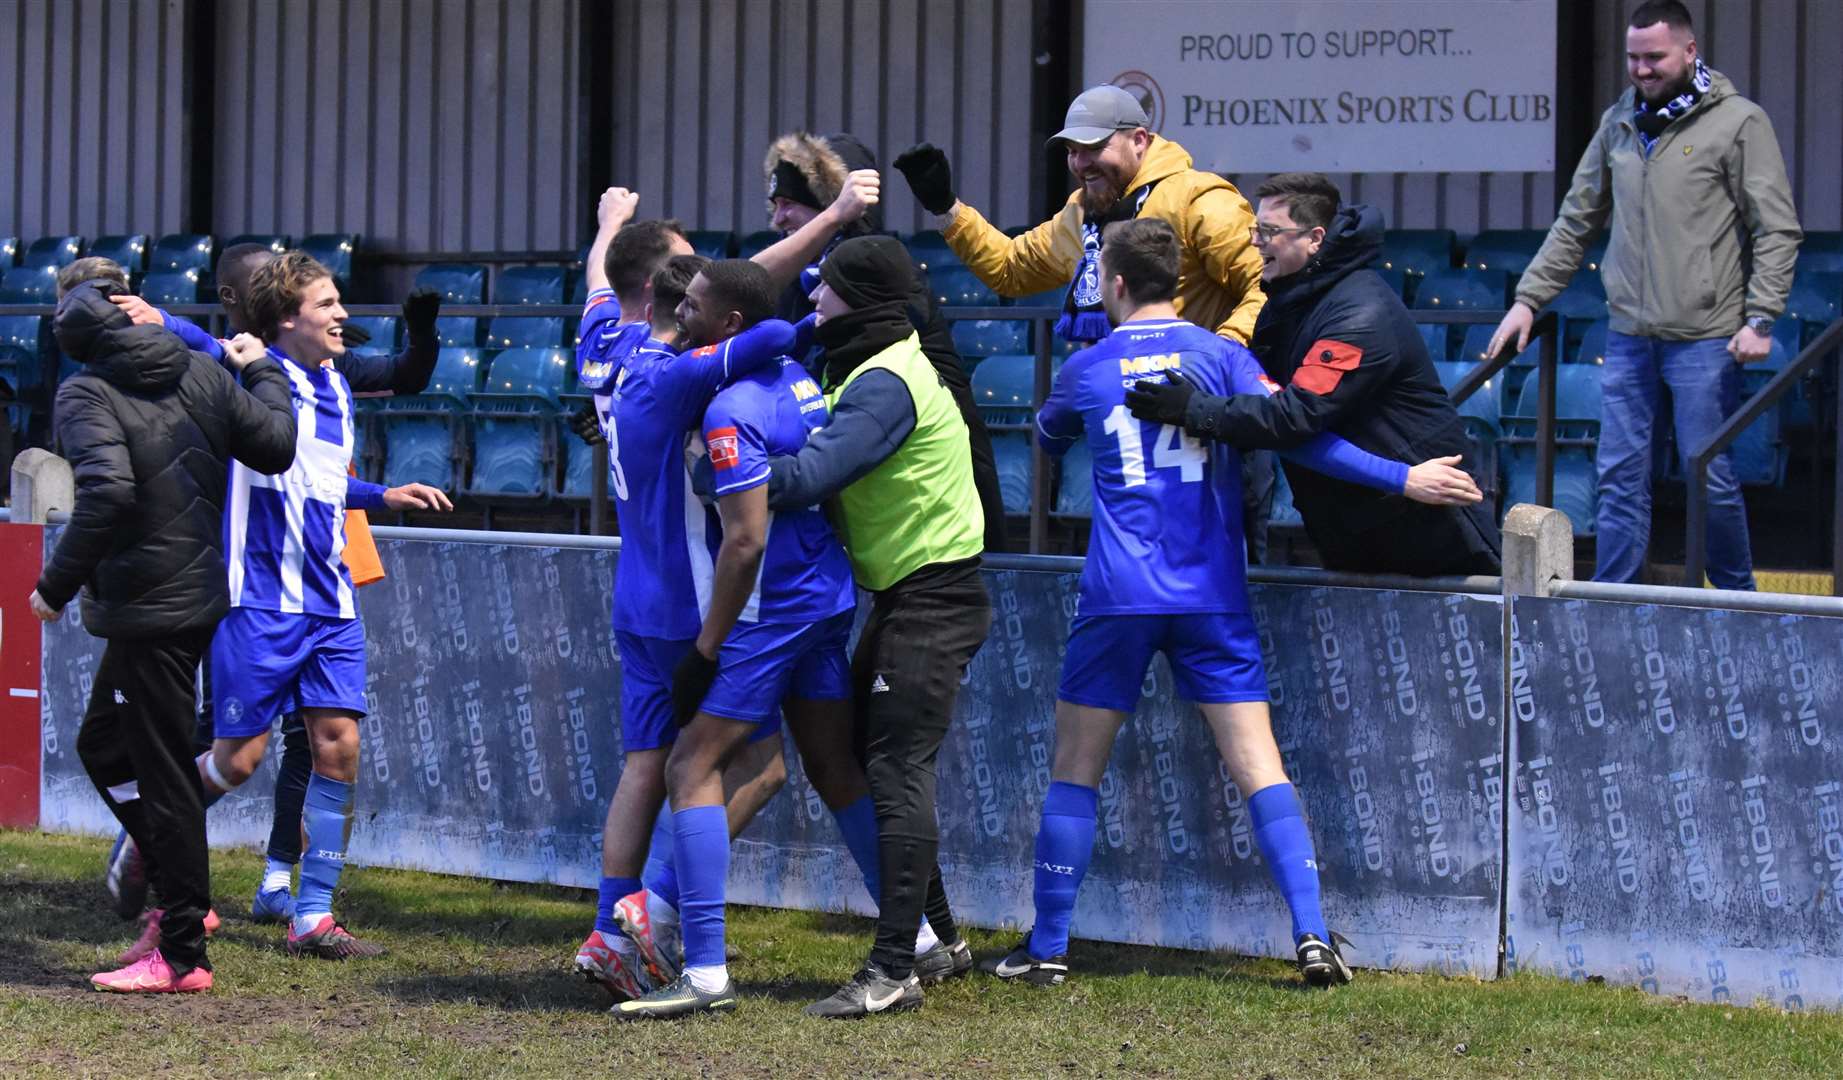 Herne Bay celebrate with their fans at Phoenix Sports on Saturday. Picture: Alan Coomes